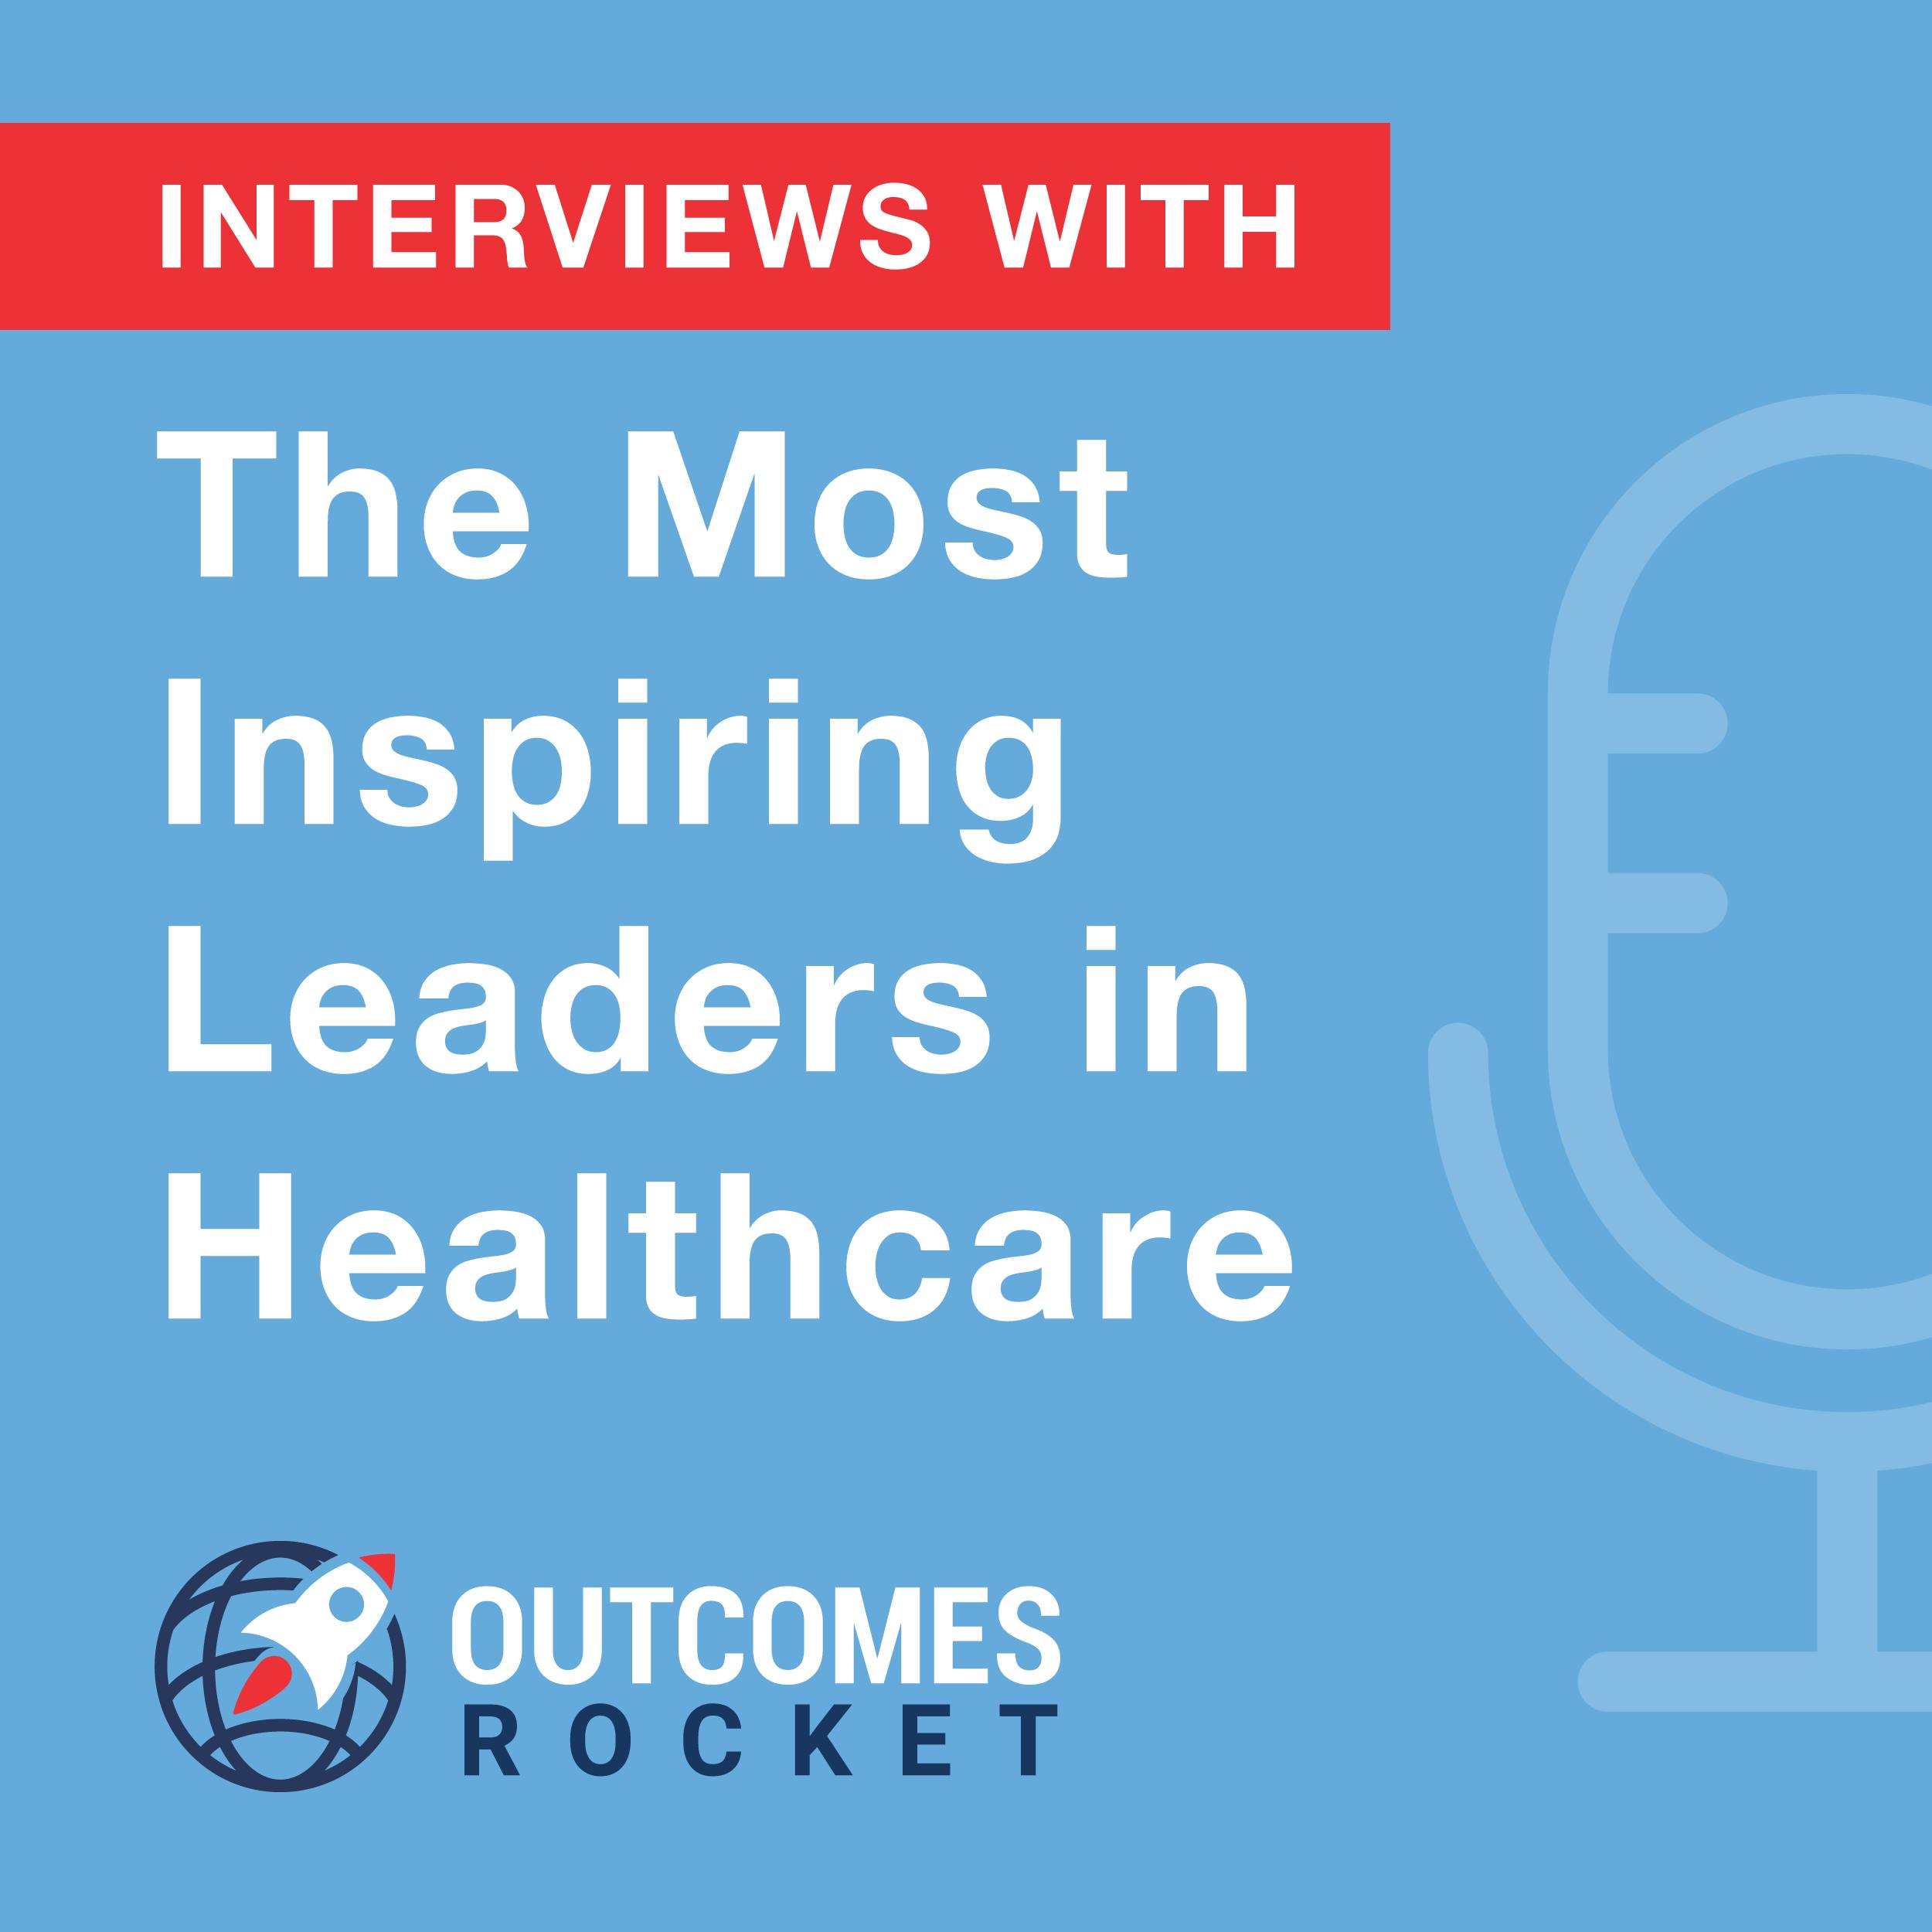 How to Become a Healthcare Thought Leader with Robin Farmanfarmaian, Professional Speaker, Entrepreneur, and Angel Investor